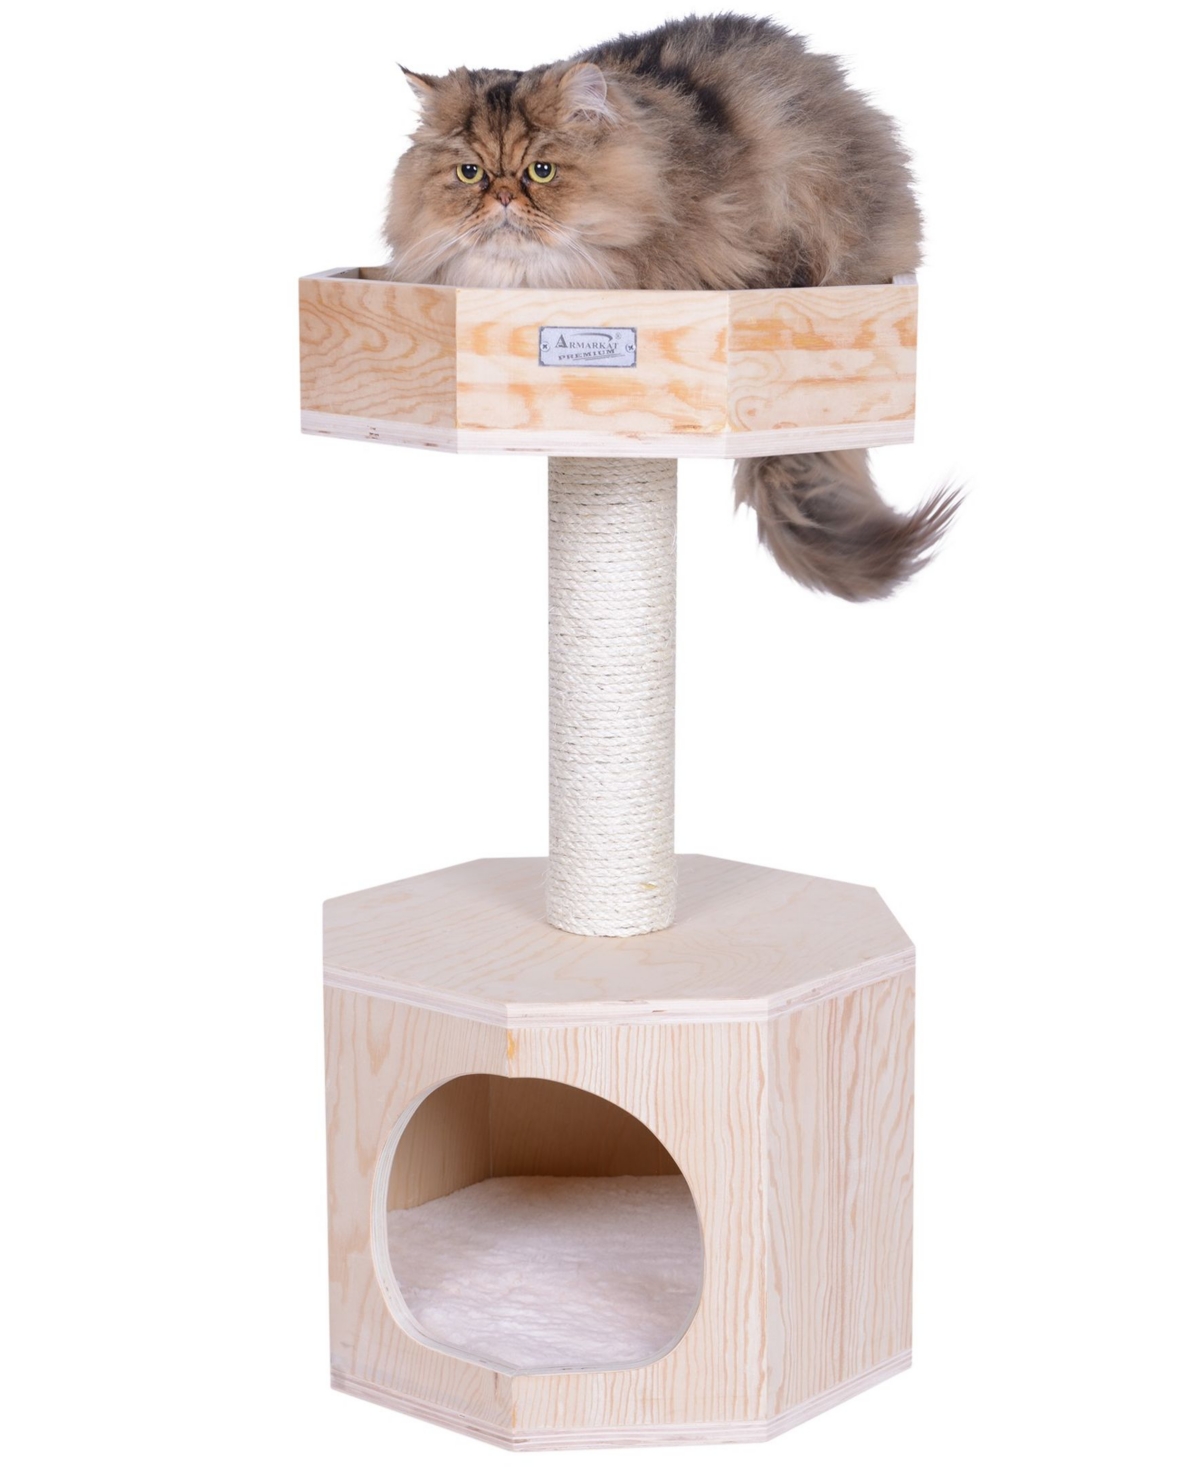 29" Premium Scots Pine, Real Wood Cat Tree With Perch & Condo - Naturre